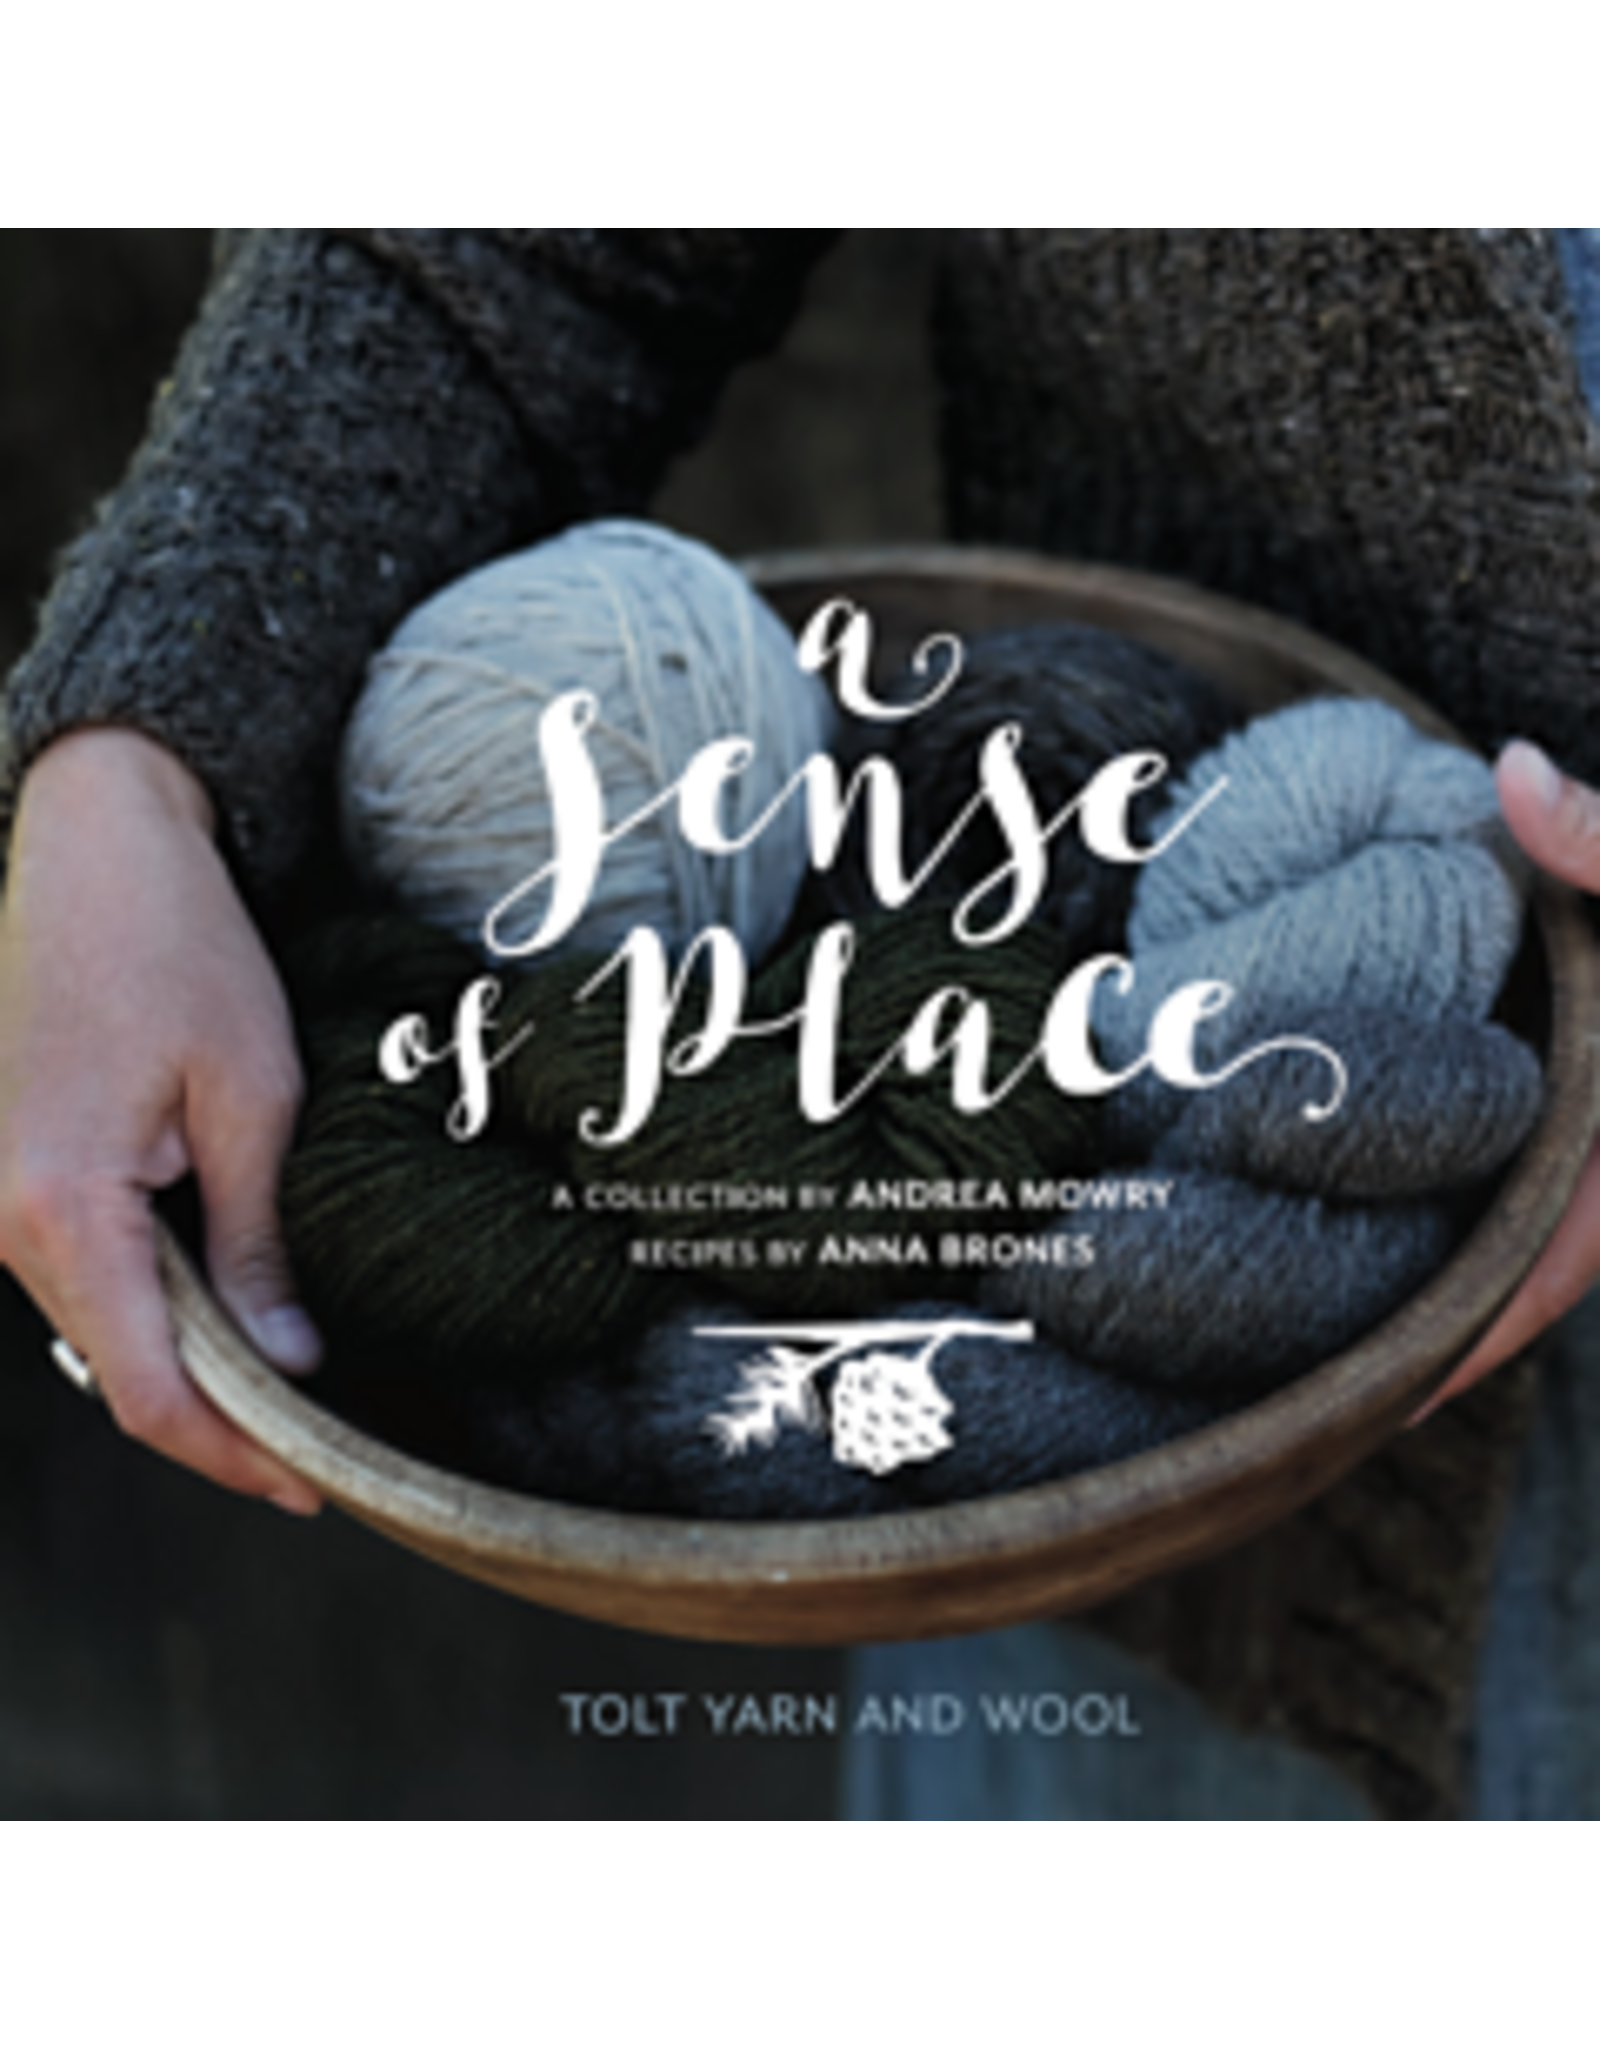 Never Not Knitting A Sense of Place by Andrea Mowry